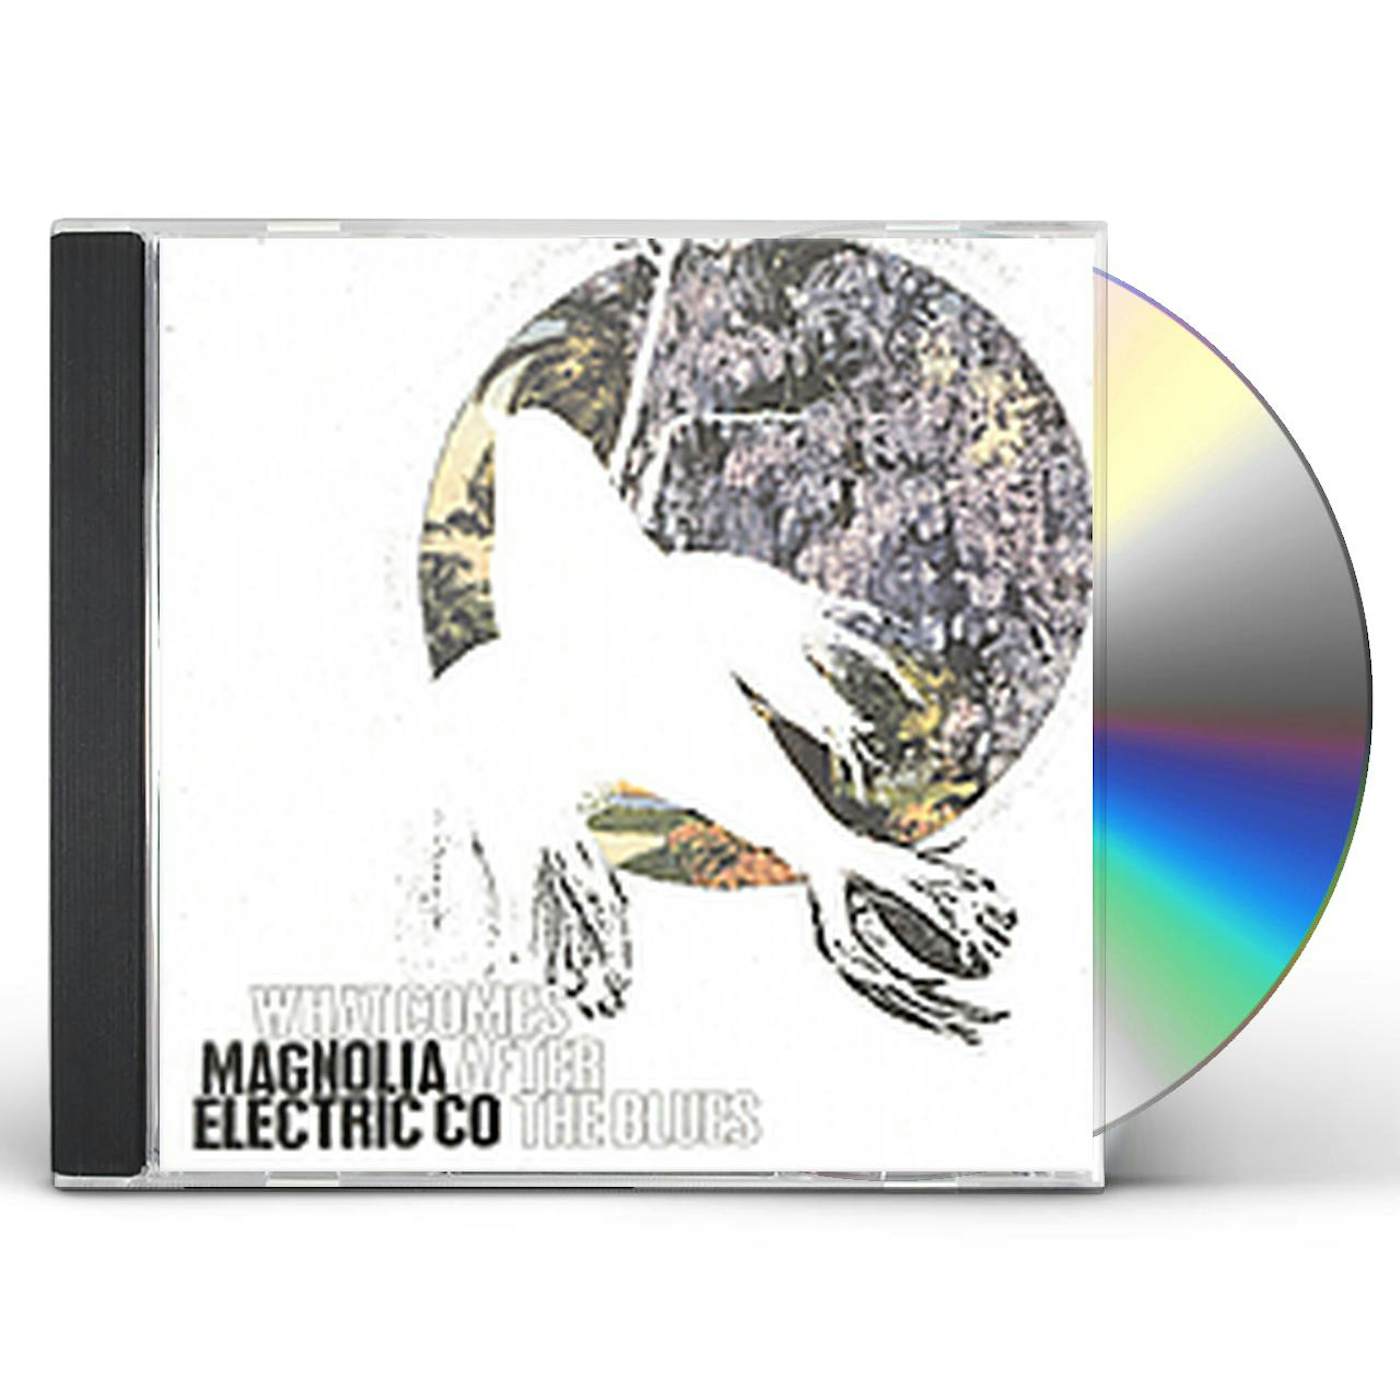 Magnolia Electric Co. WHAT COMES AFTER THE BLUES CD